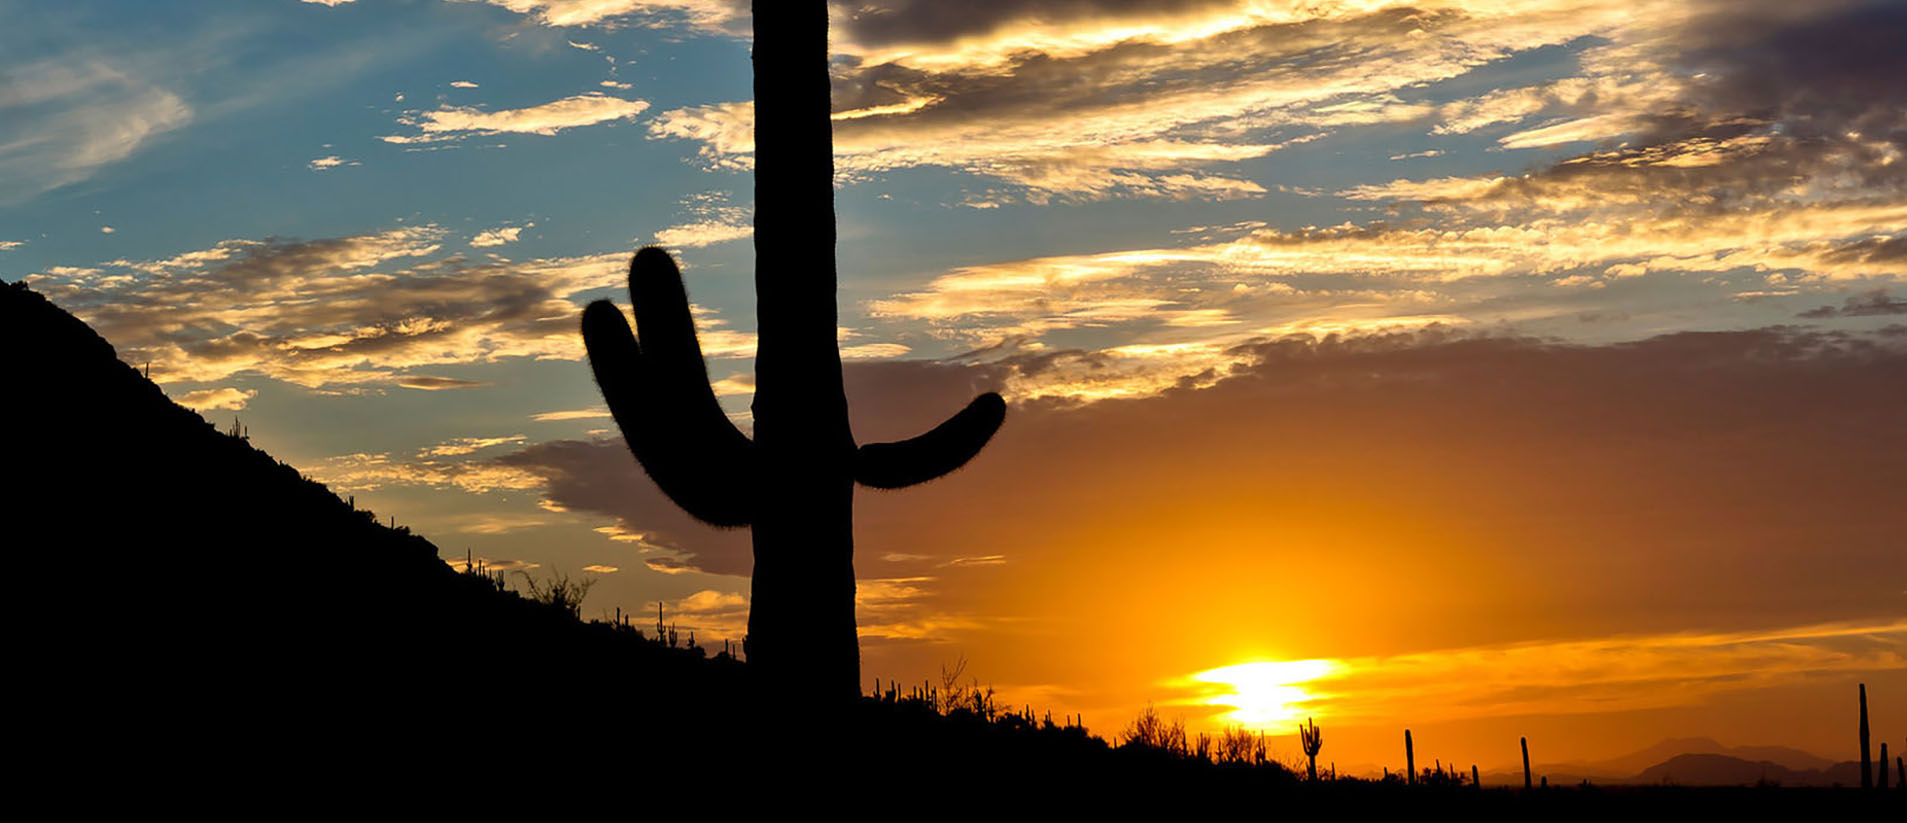 The sun sets through a saguaro's arms behind the mountain at Picacho Peak